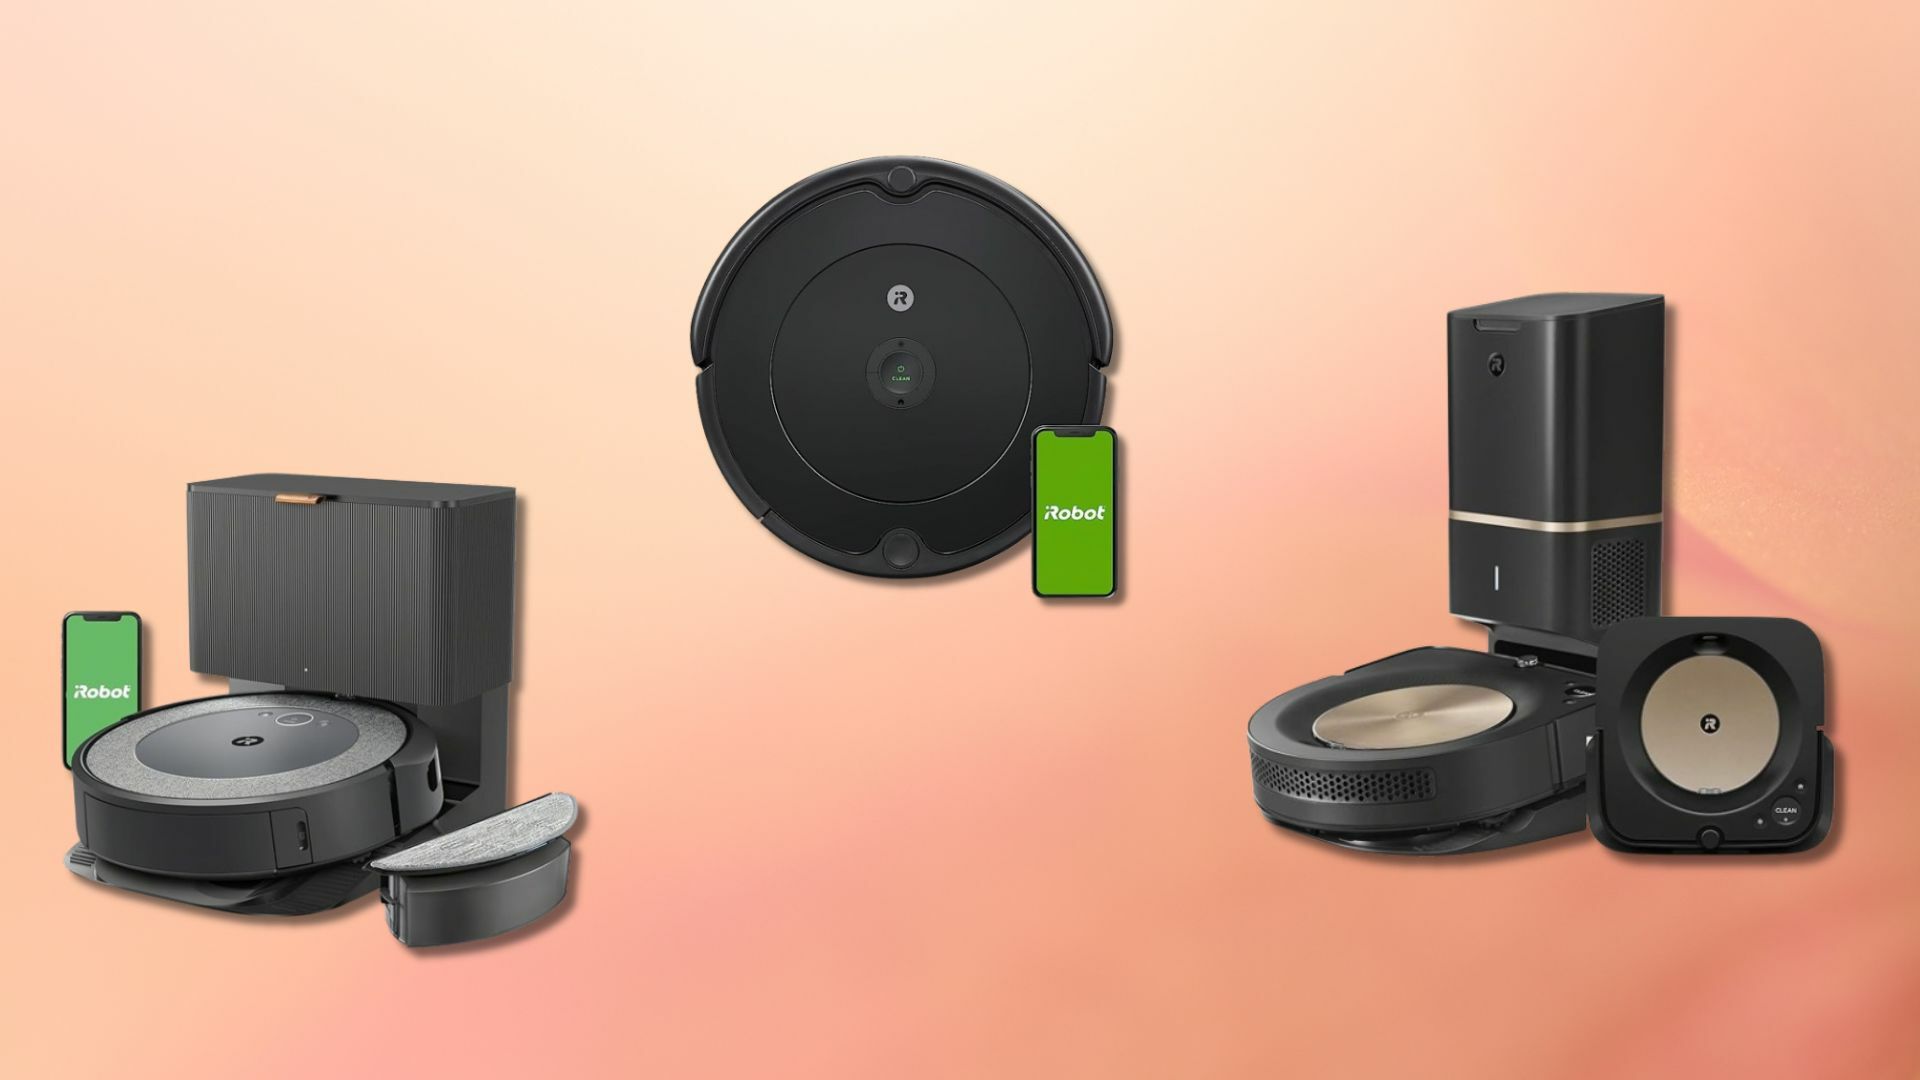 iRobot Roomba vacuums and Braava mops against an abstract background